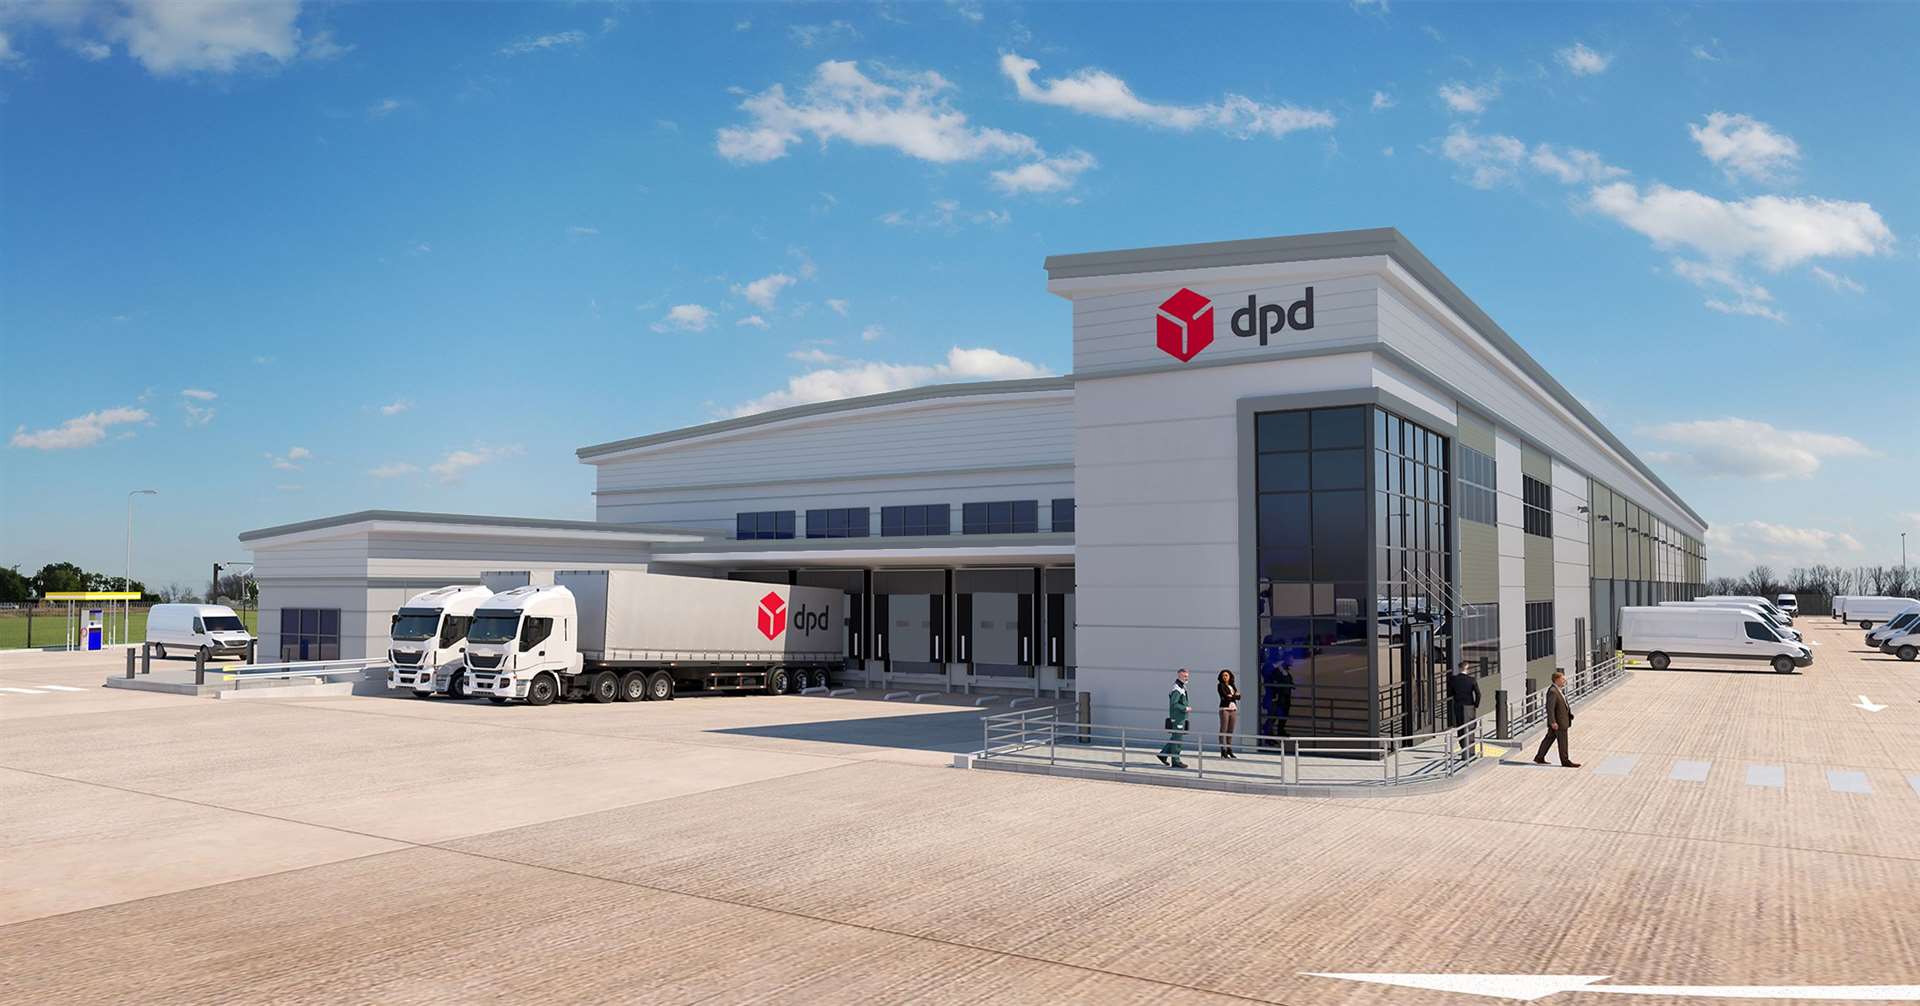 CGI of how the new DPD site in Wrotham will look